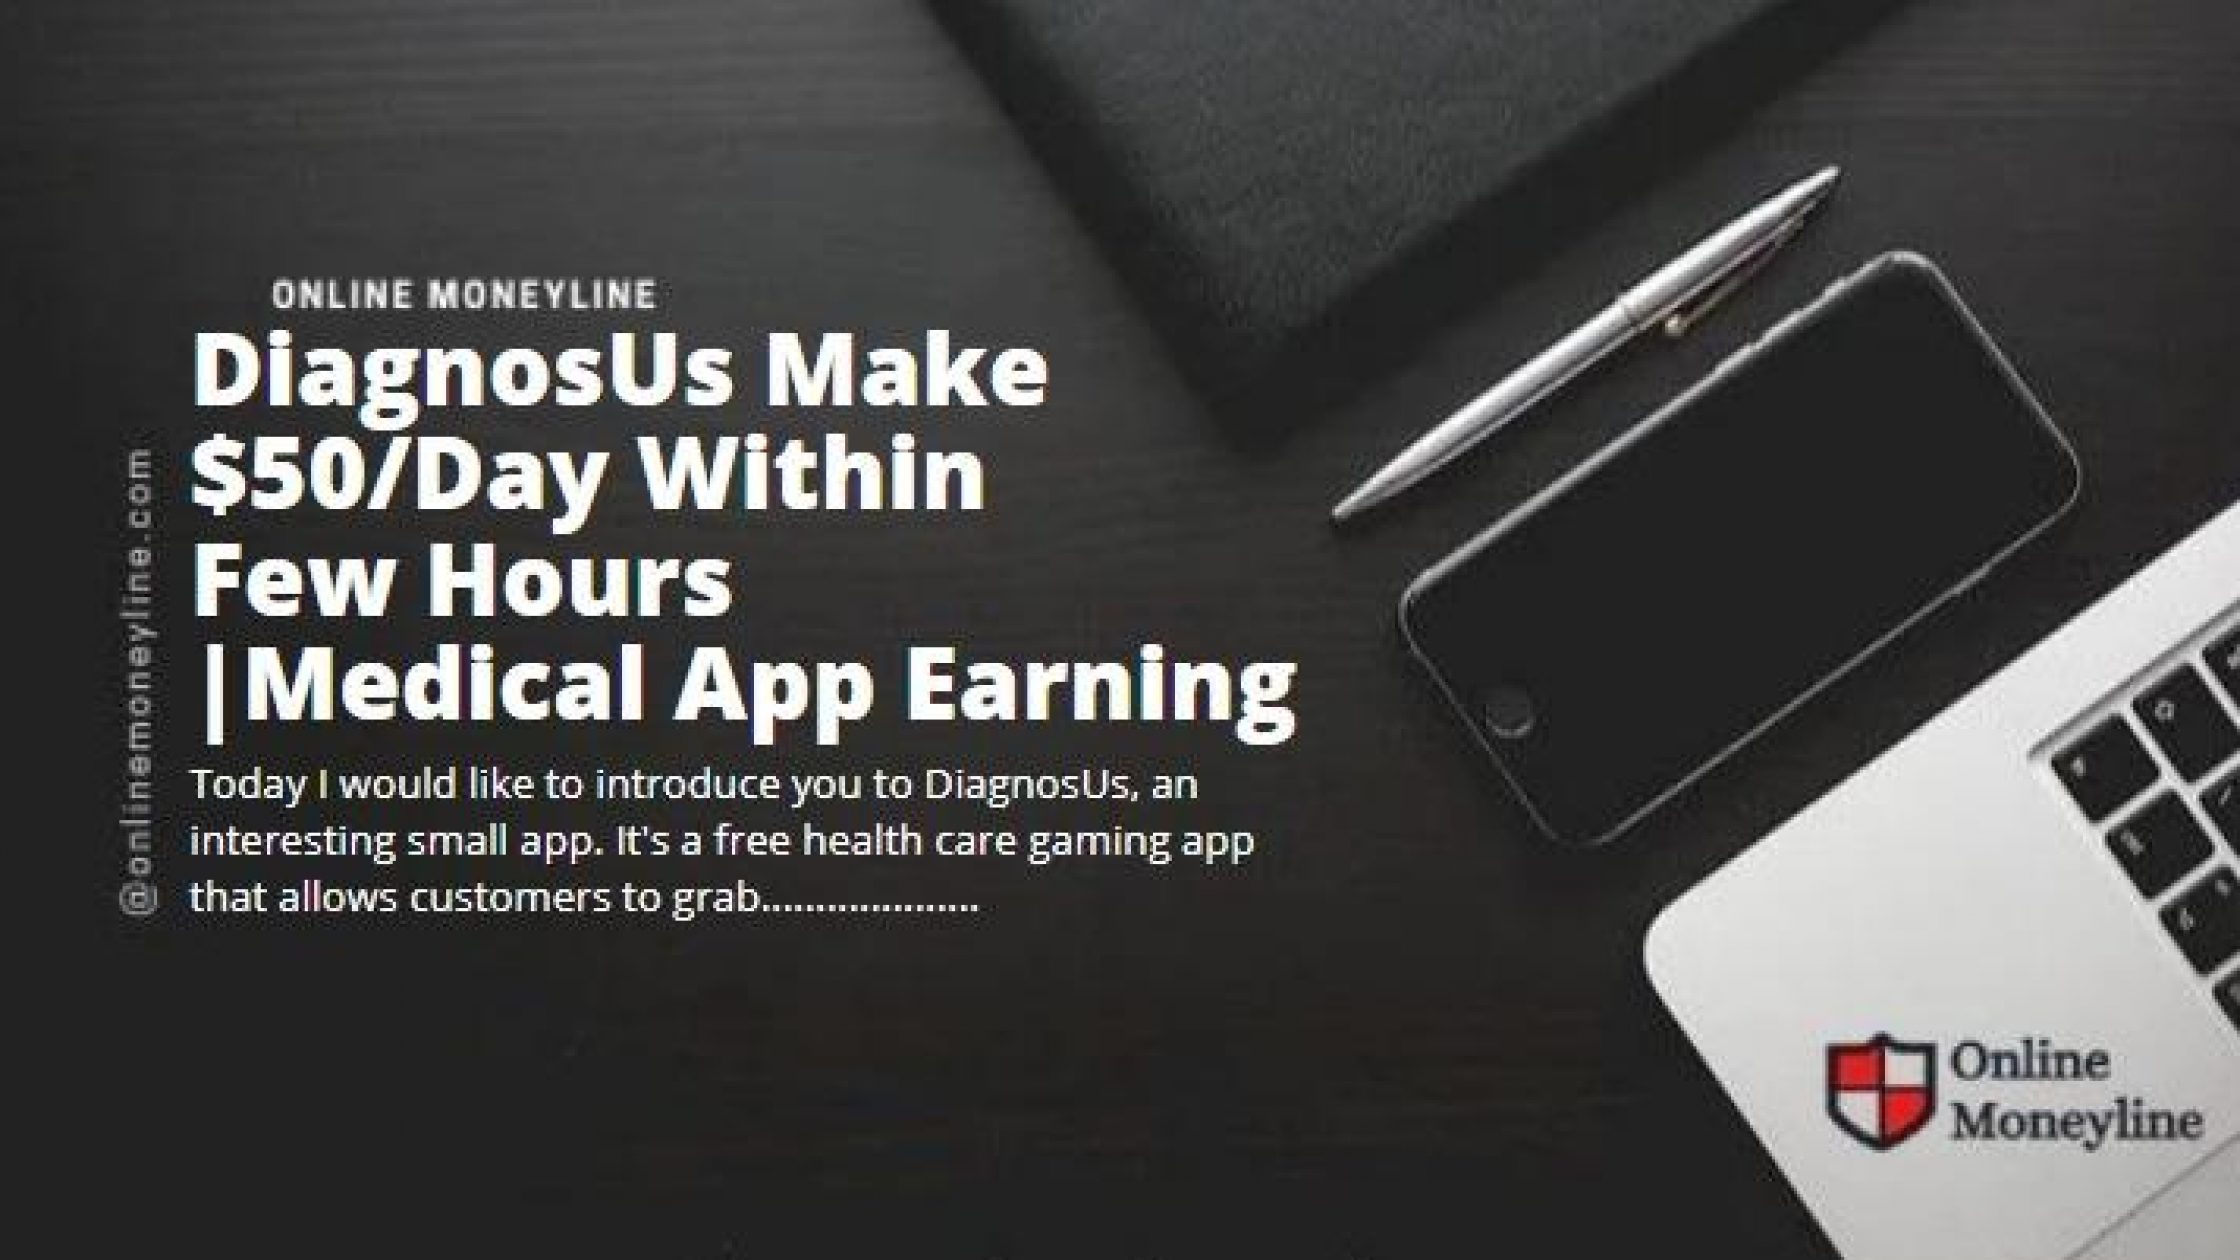 DiagnosUs Make $50/Day Within Few Hours |Medical App Earning